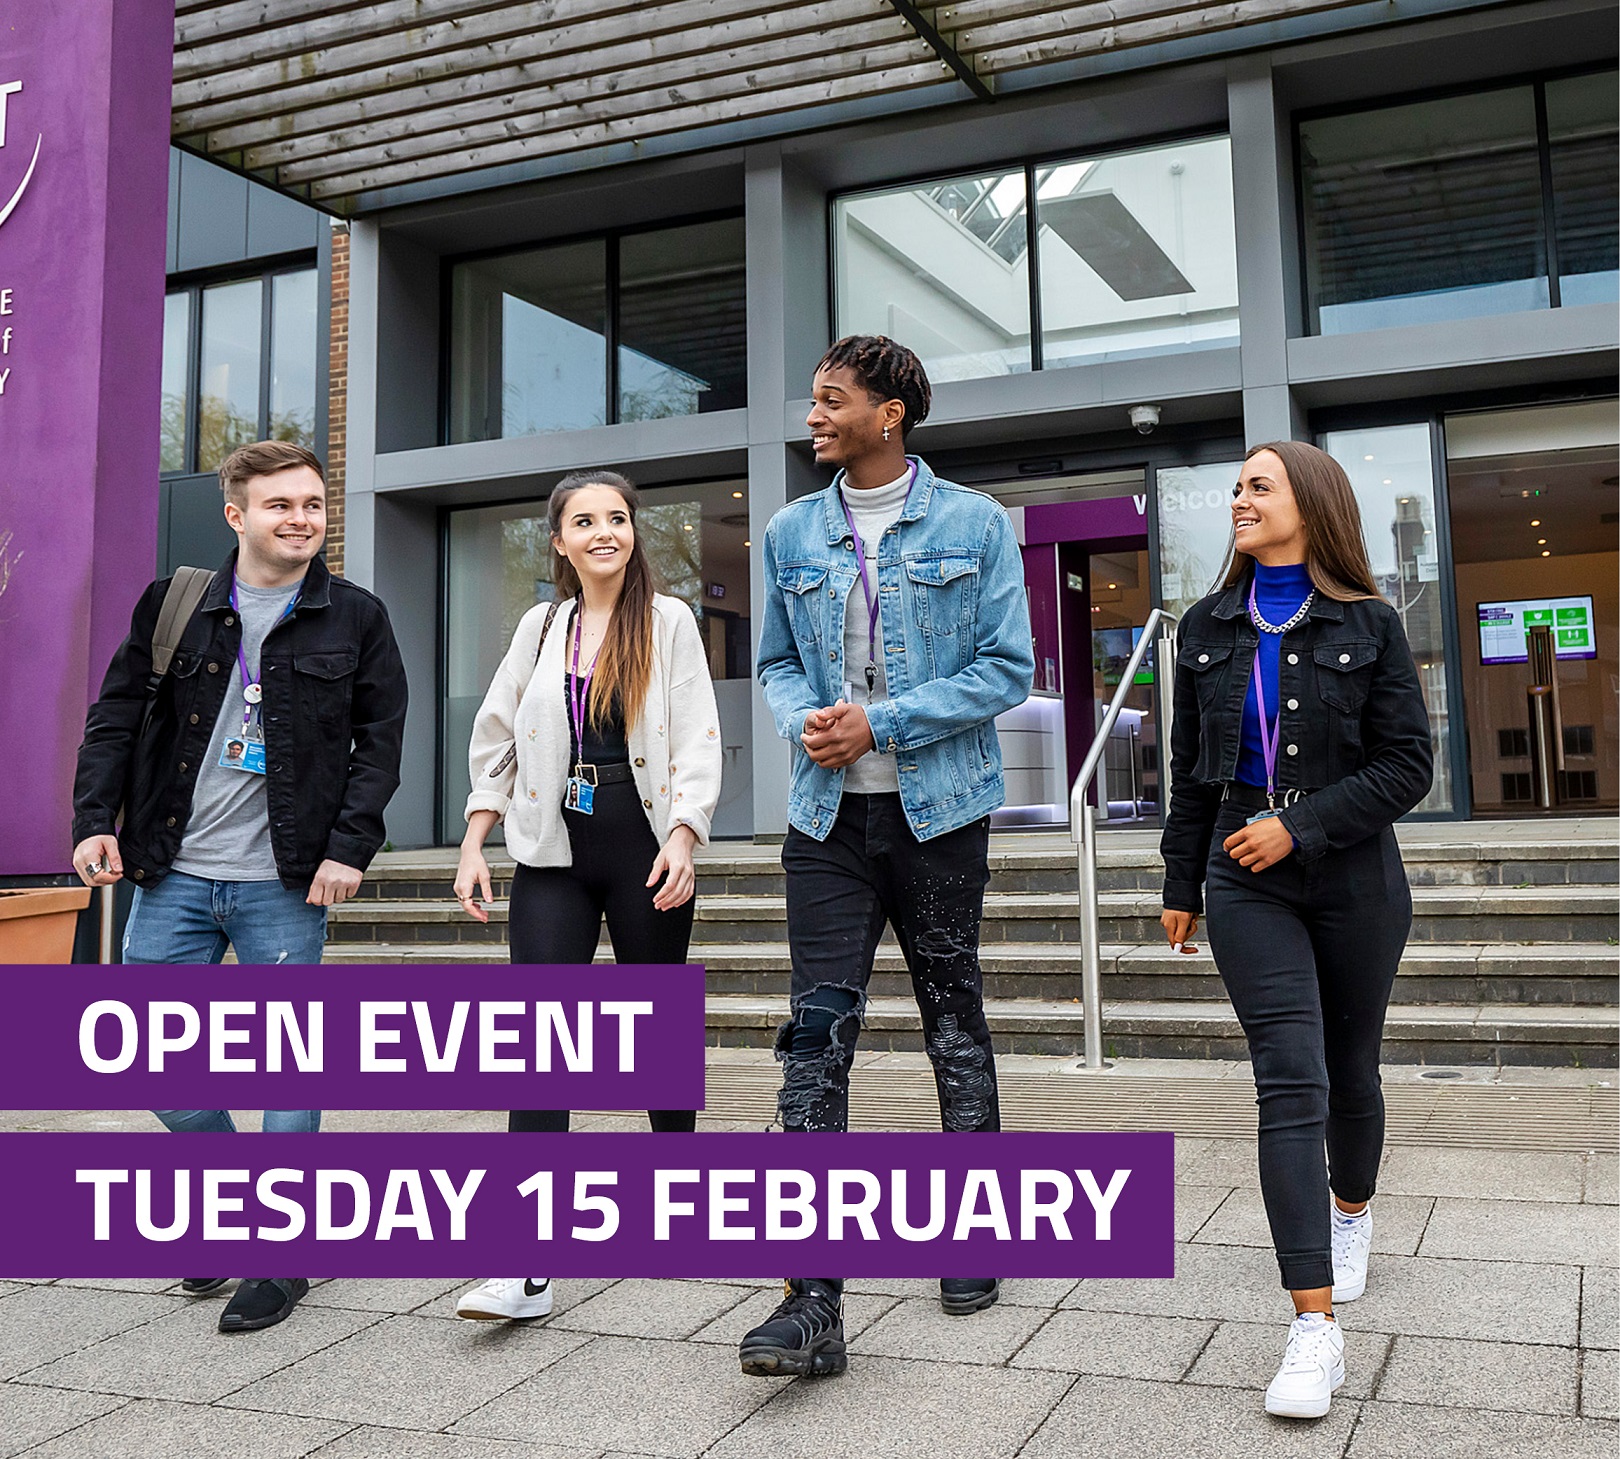 Open Event: Tuesday 15 February